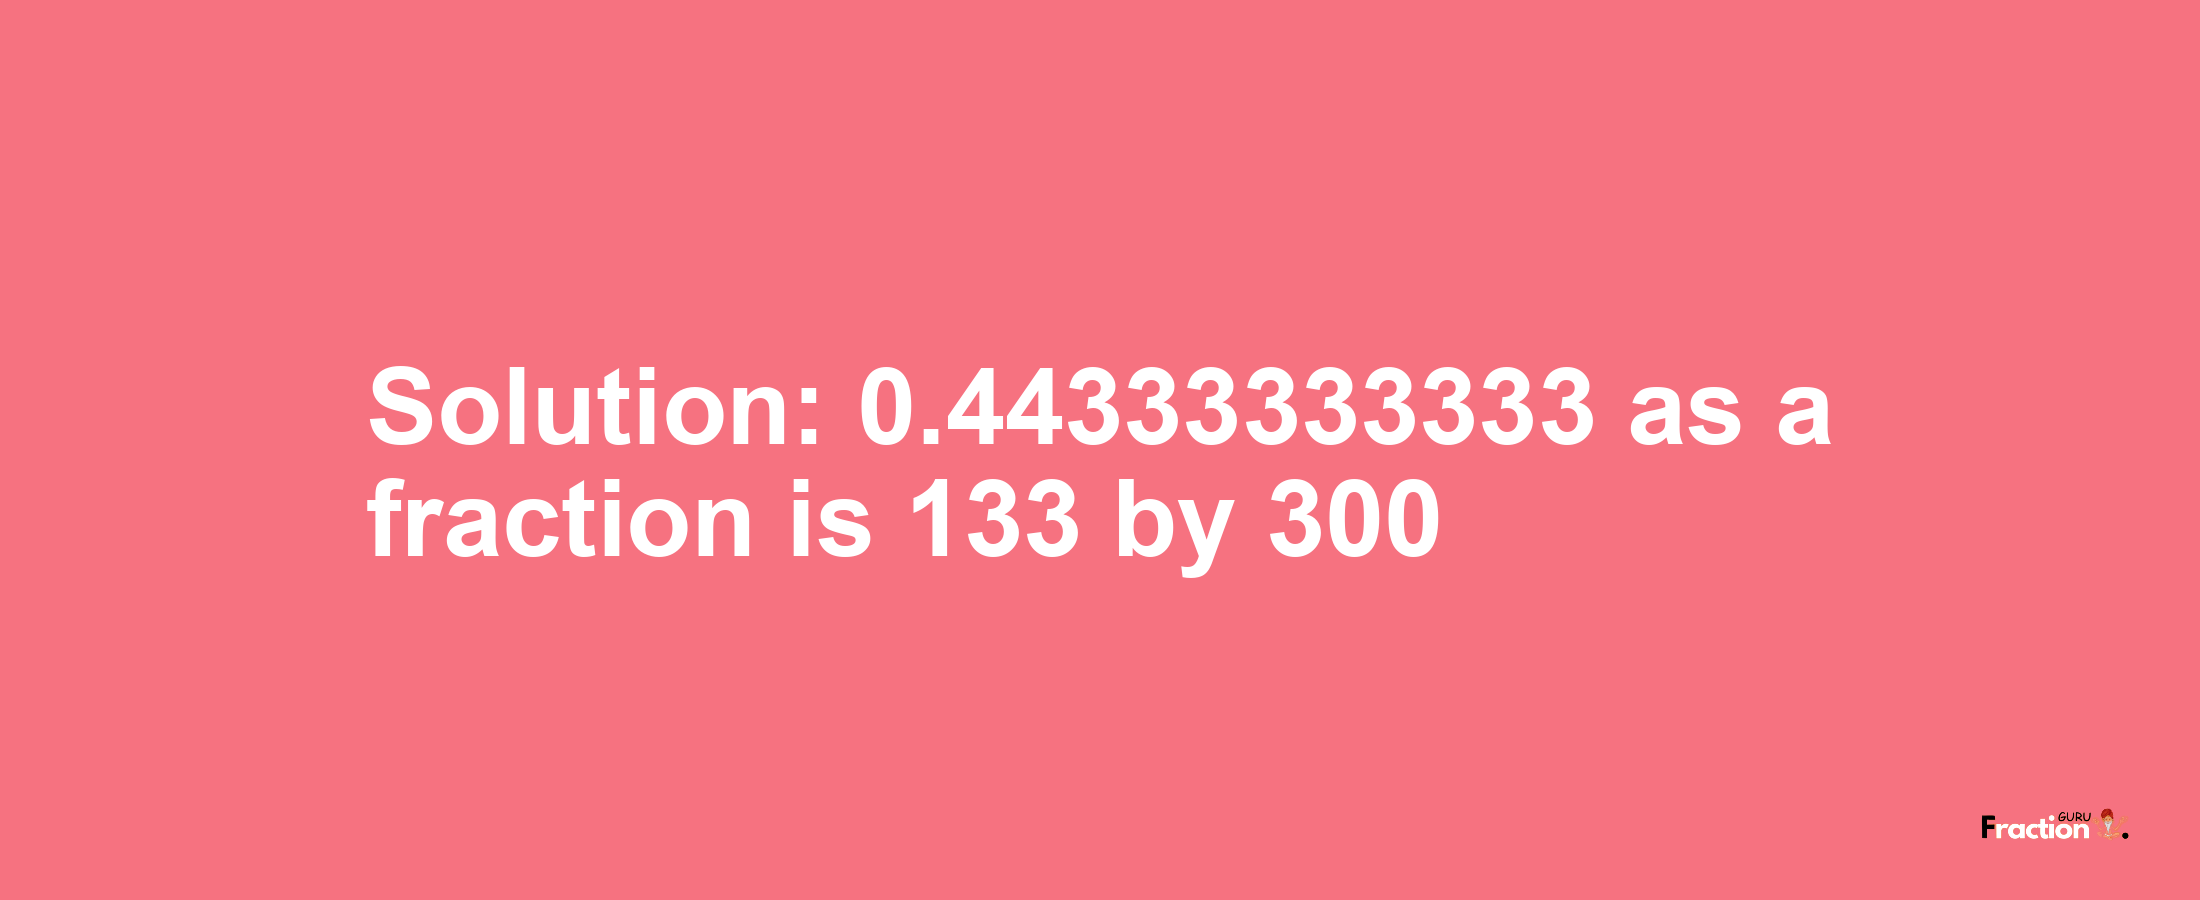 Solution:0.44333333333 as a fraction is 133/300